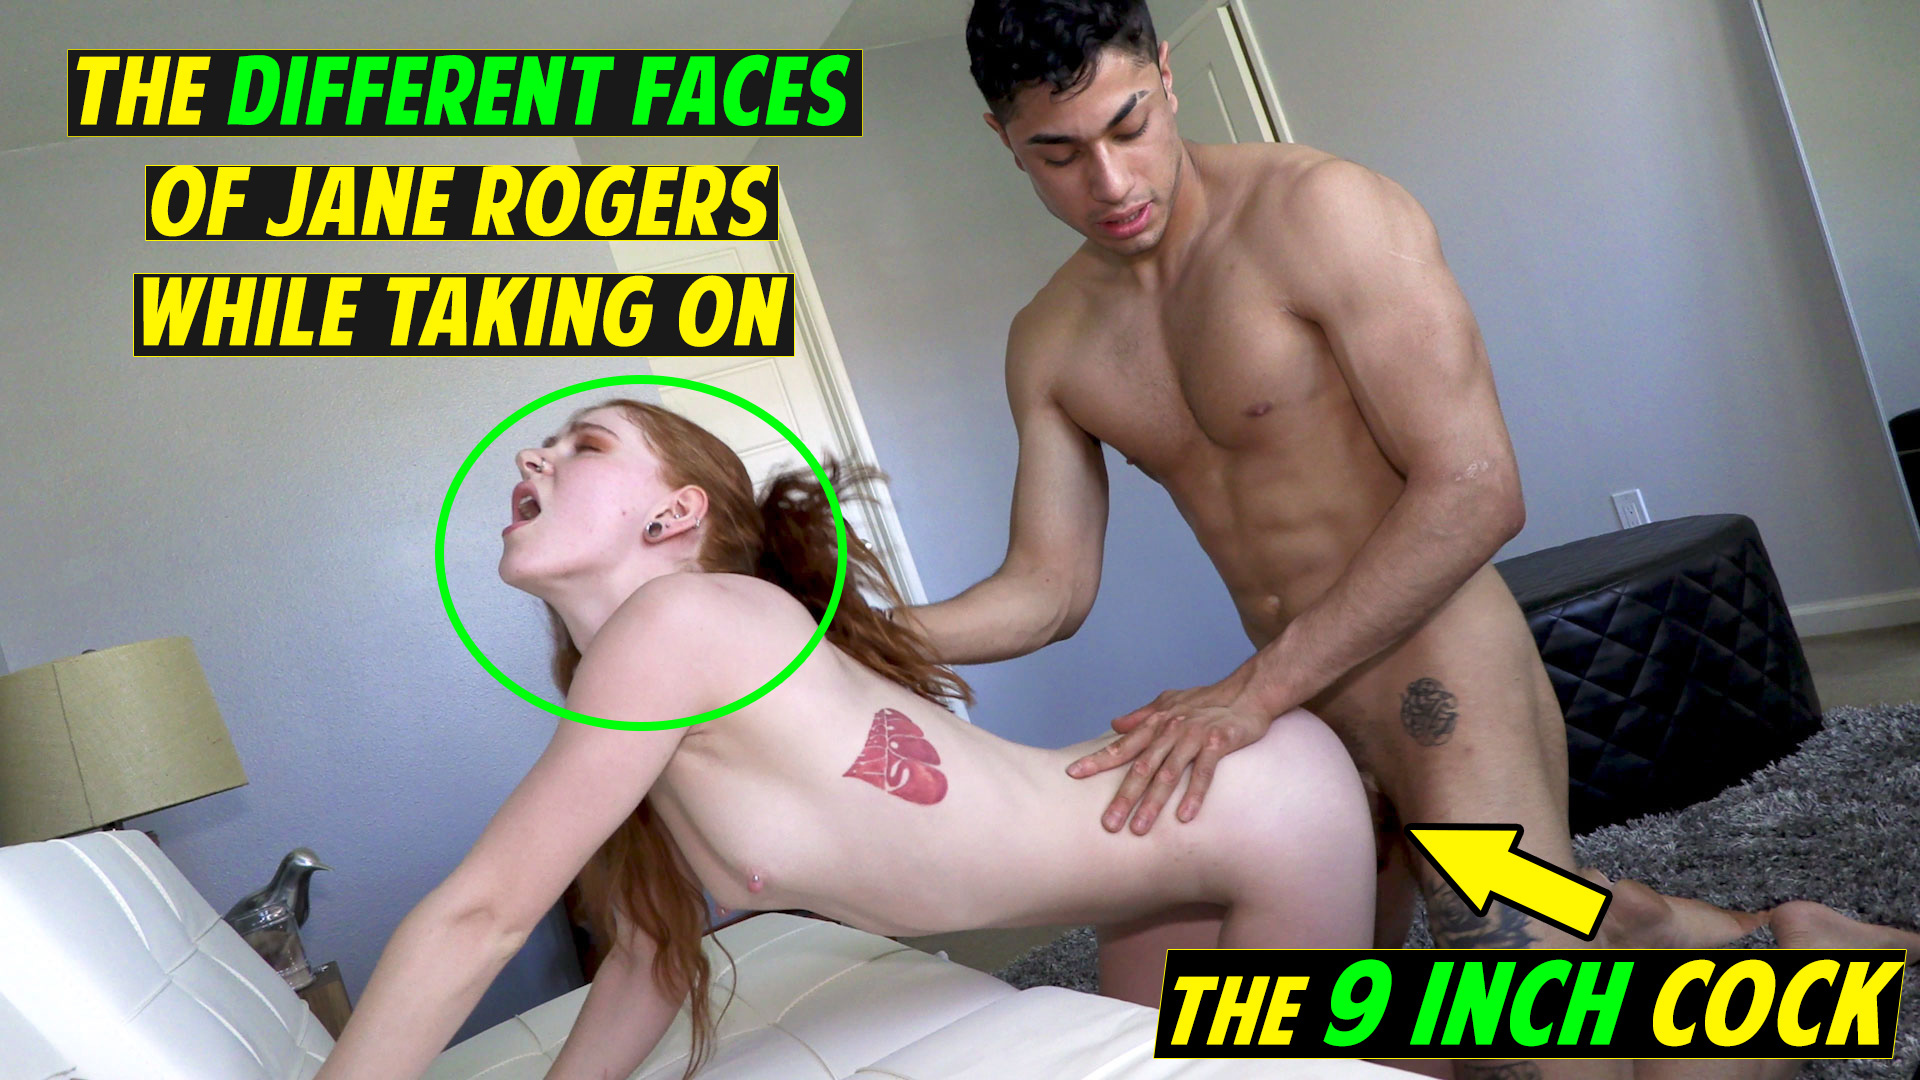 Pretty Boy Latino With Big Dick Victor Frank Loves The Tight Pussy On His First Redhead Jane Rogers at HotGuysFuck